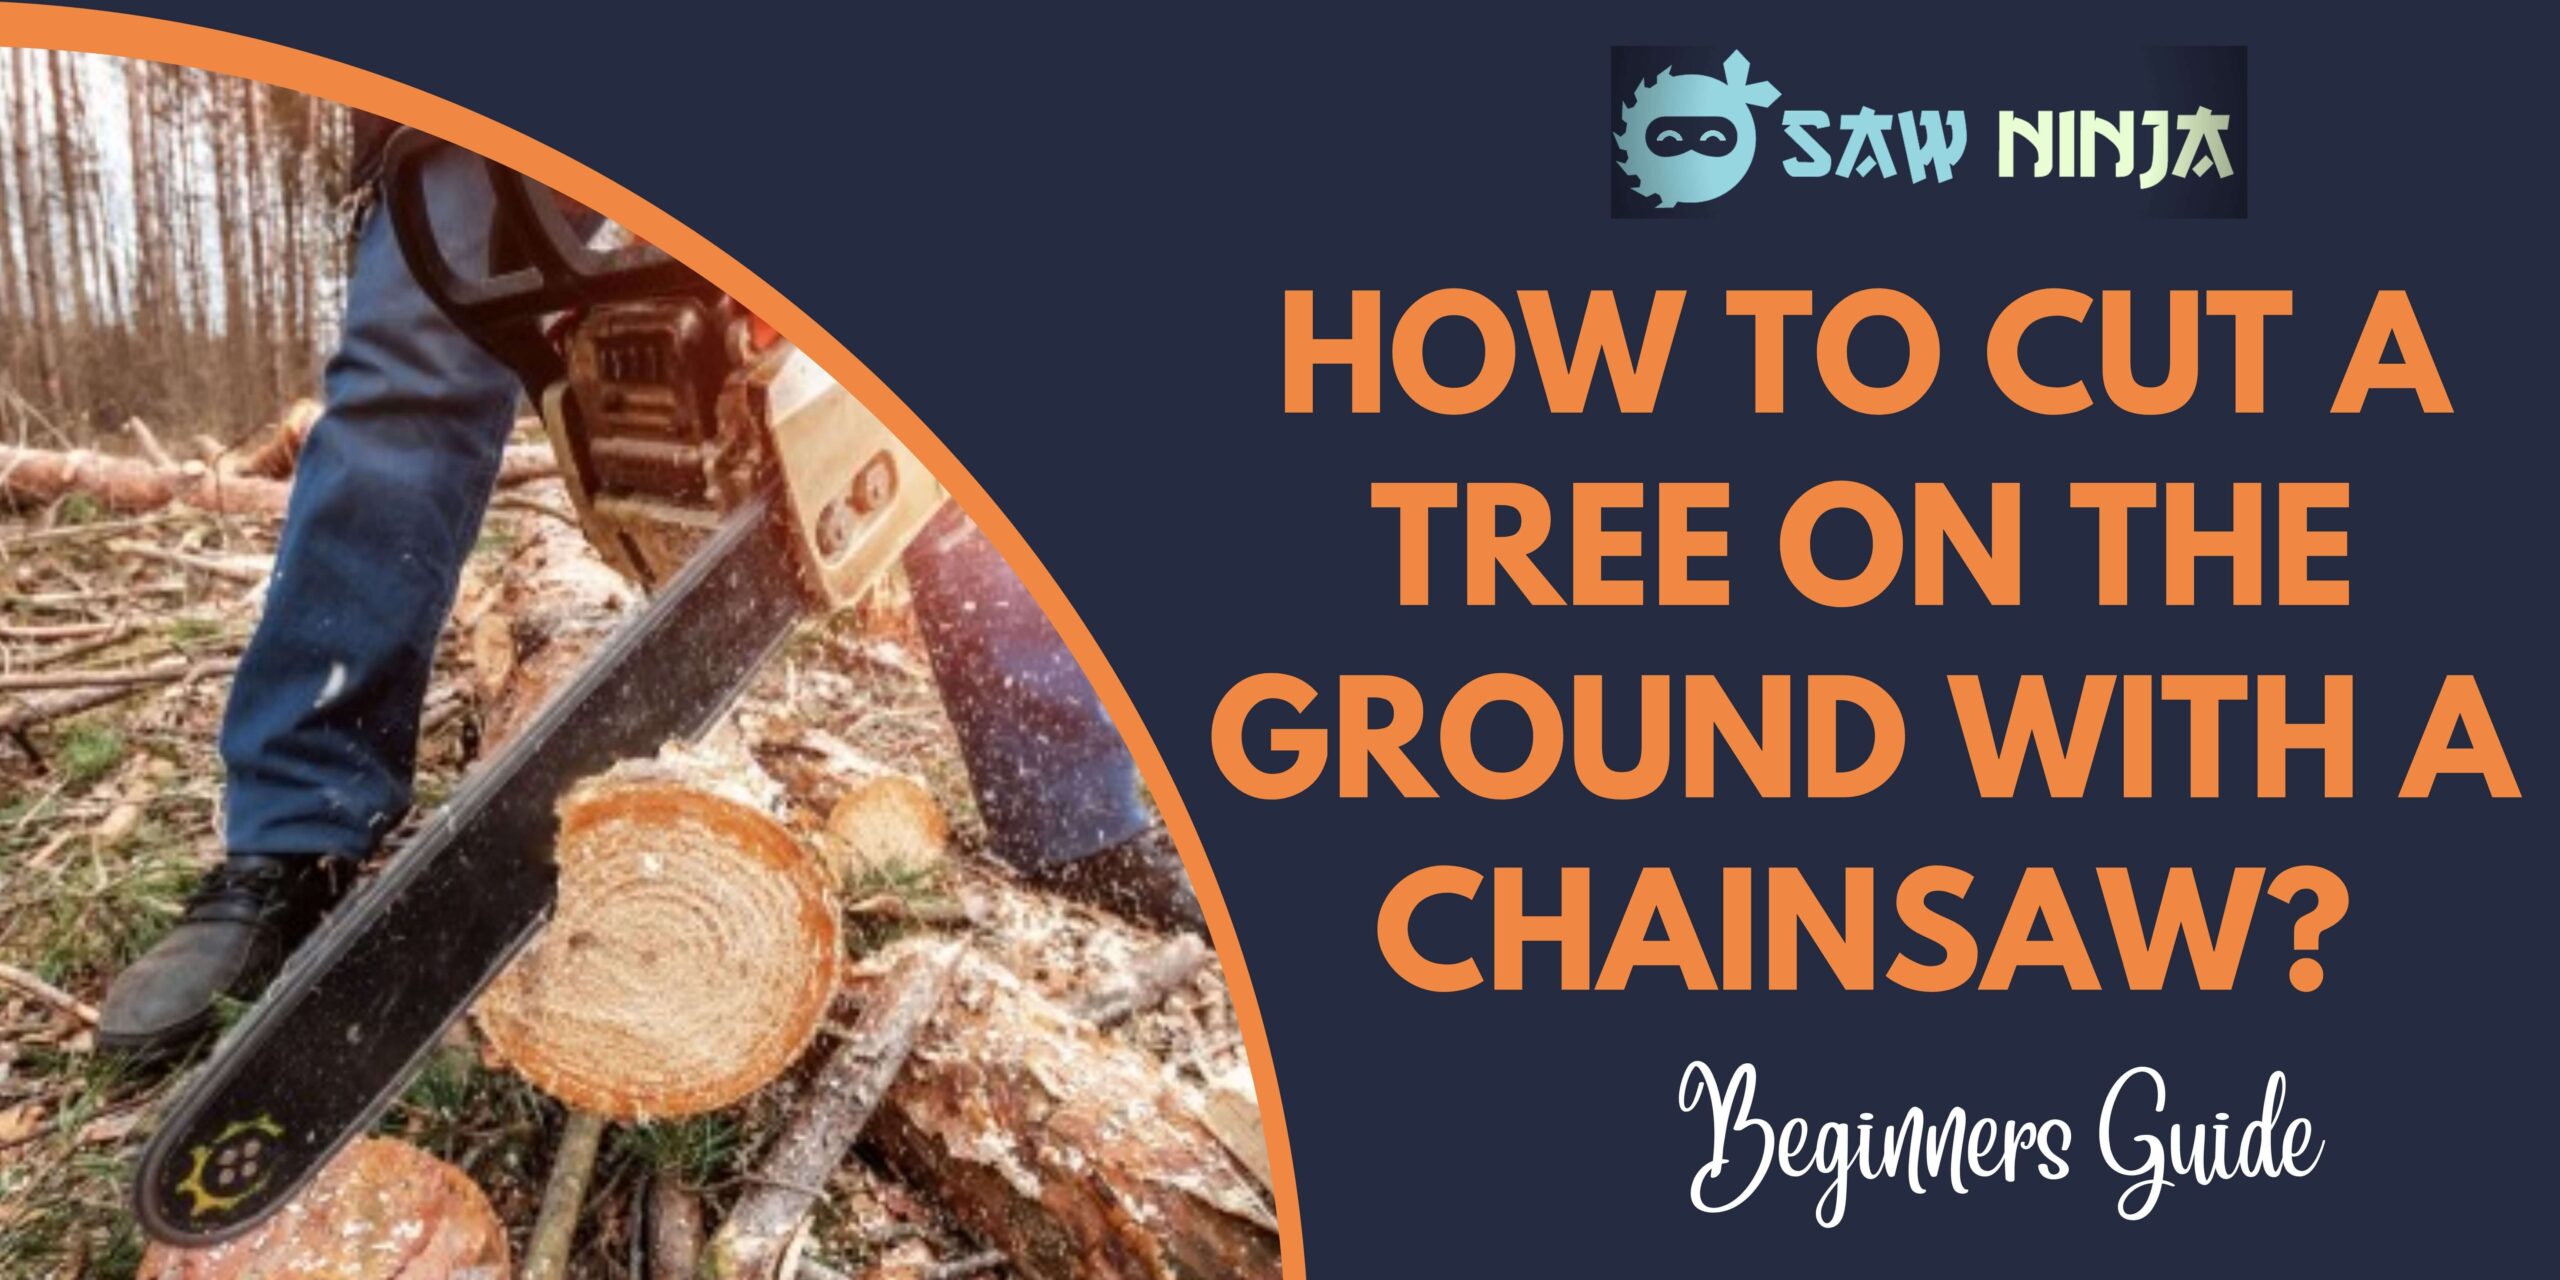 How to Cut a Tree on the Ground with a Chainsaw